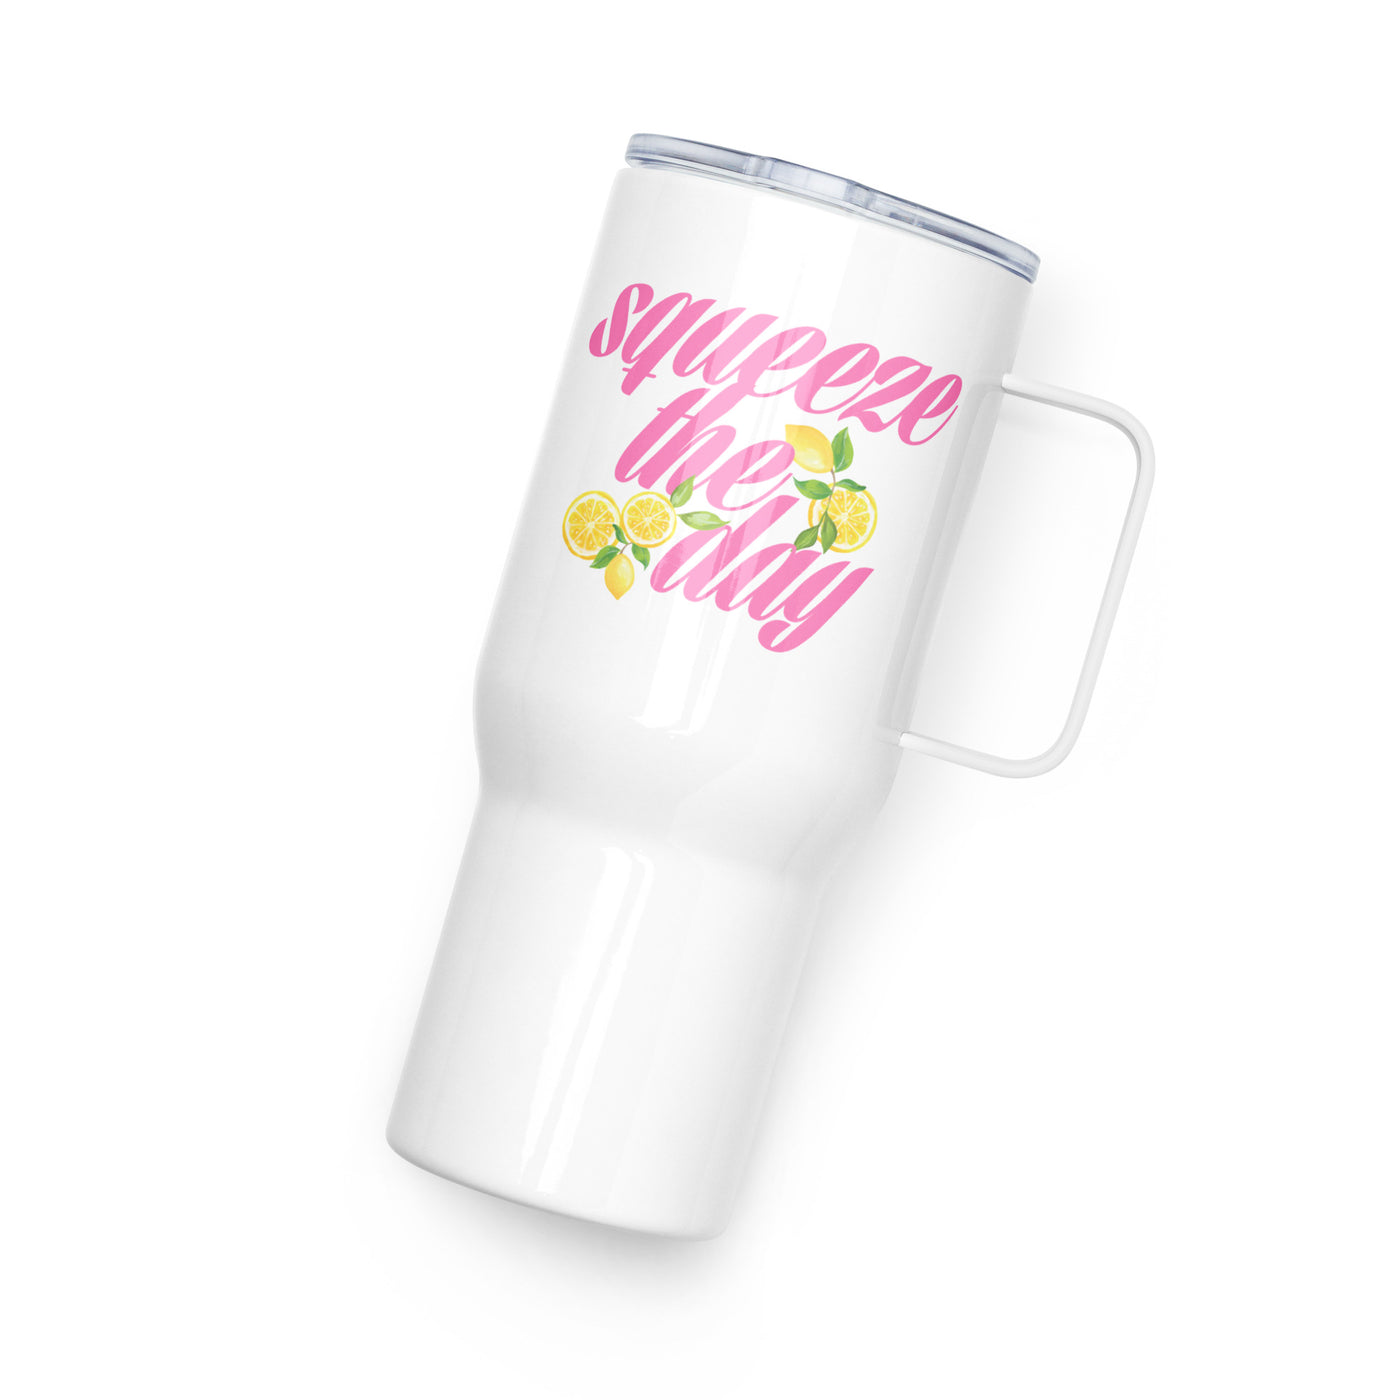 'Squeeze the Day' Travel Mug